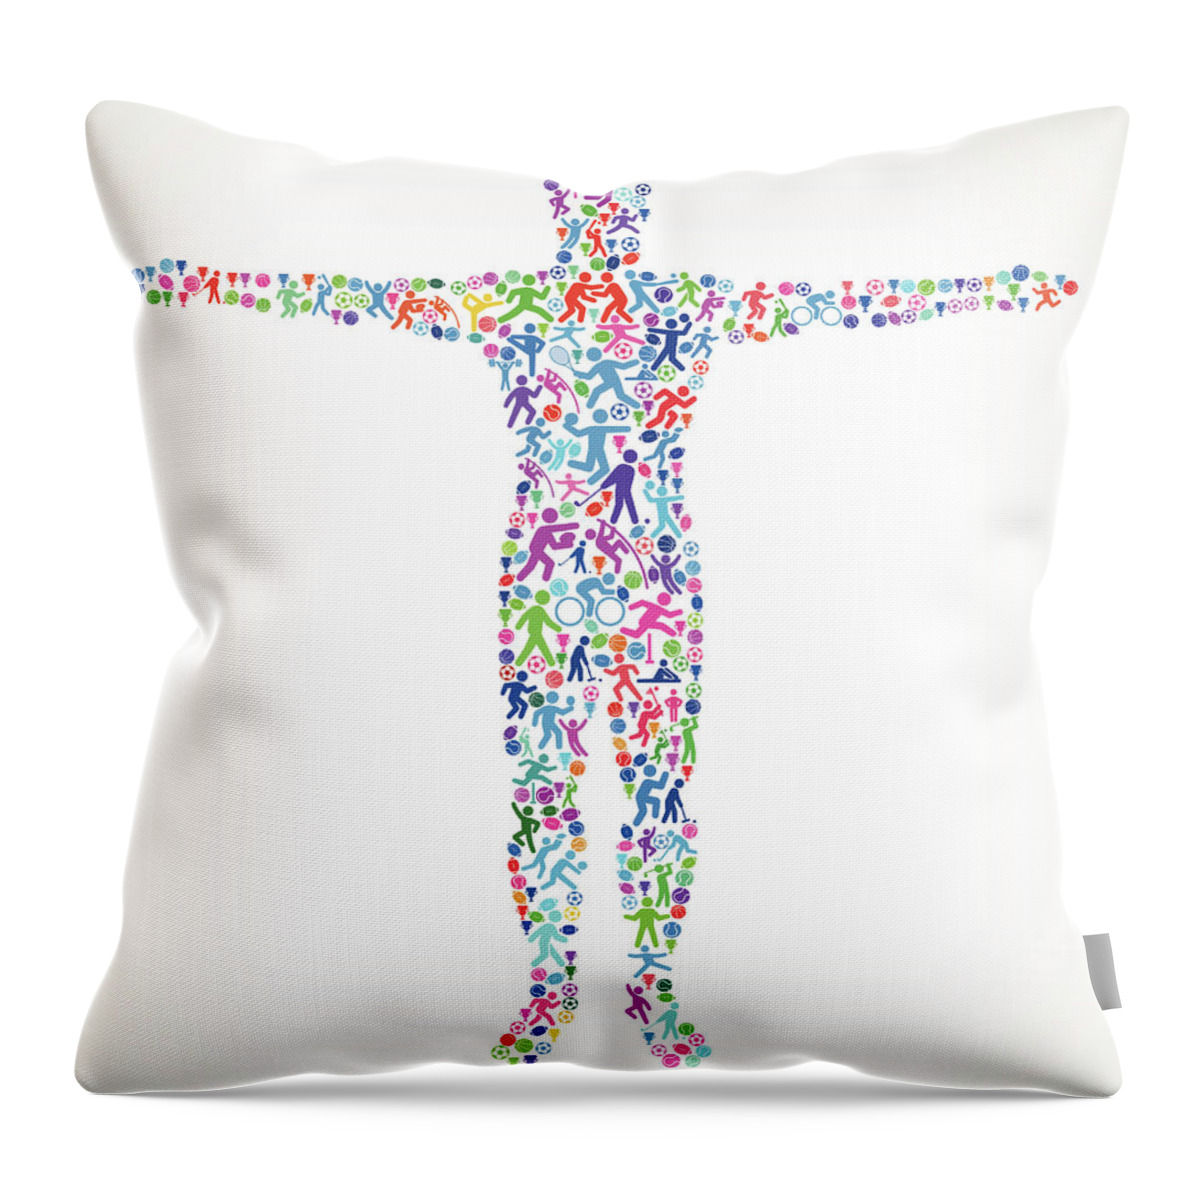 Tennis Throw Pillow featuring the digital art Human Stretching Hands Fitness Sports by Bubaone